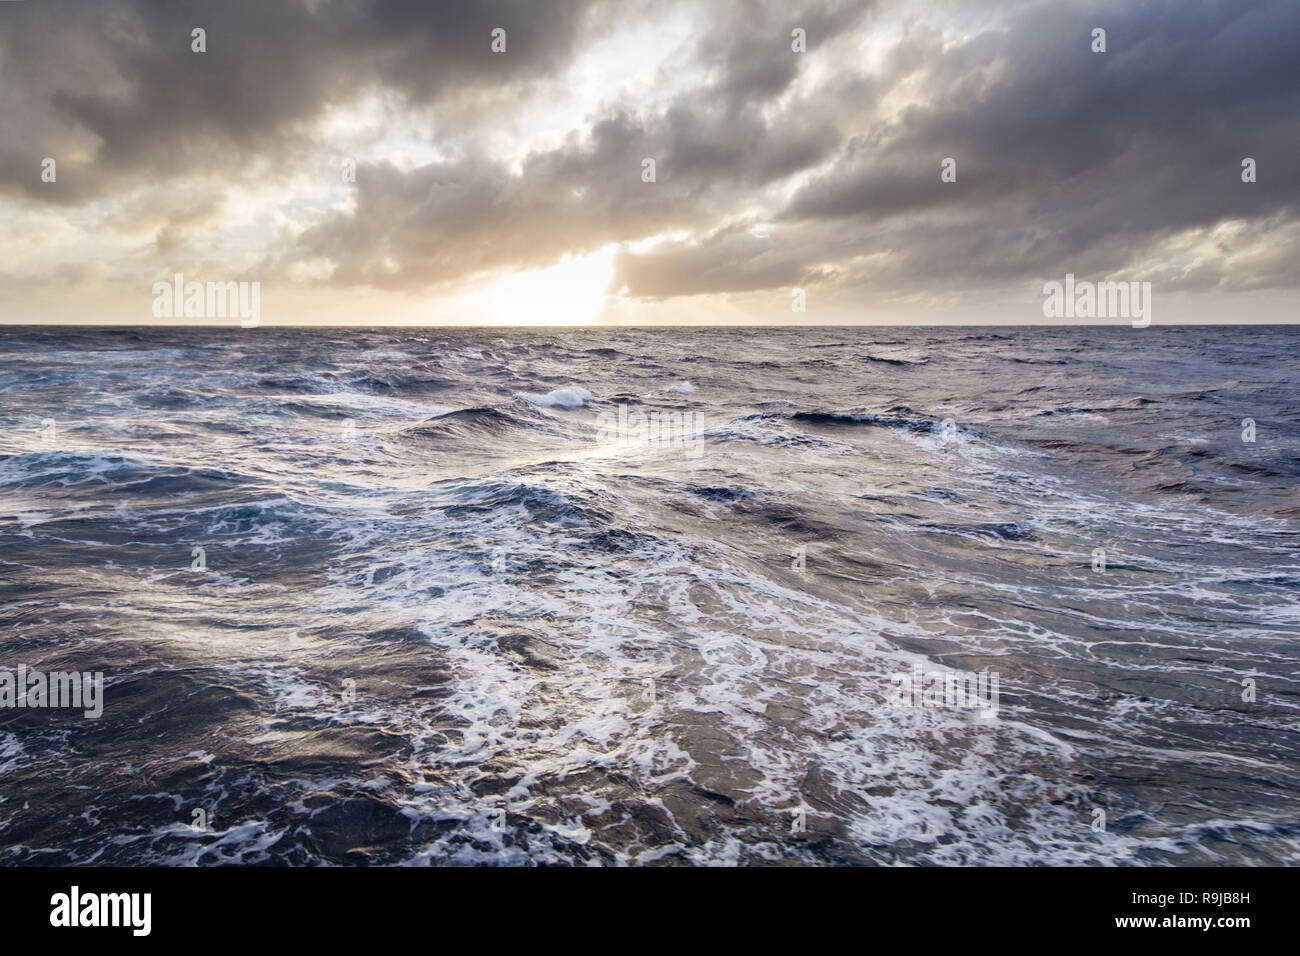 Ship cruising at stormy seas in the Southern ocean Stock Photo